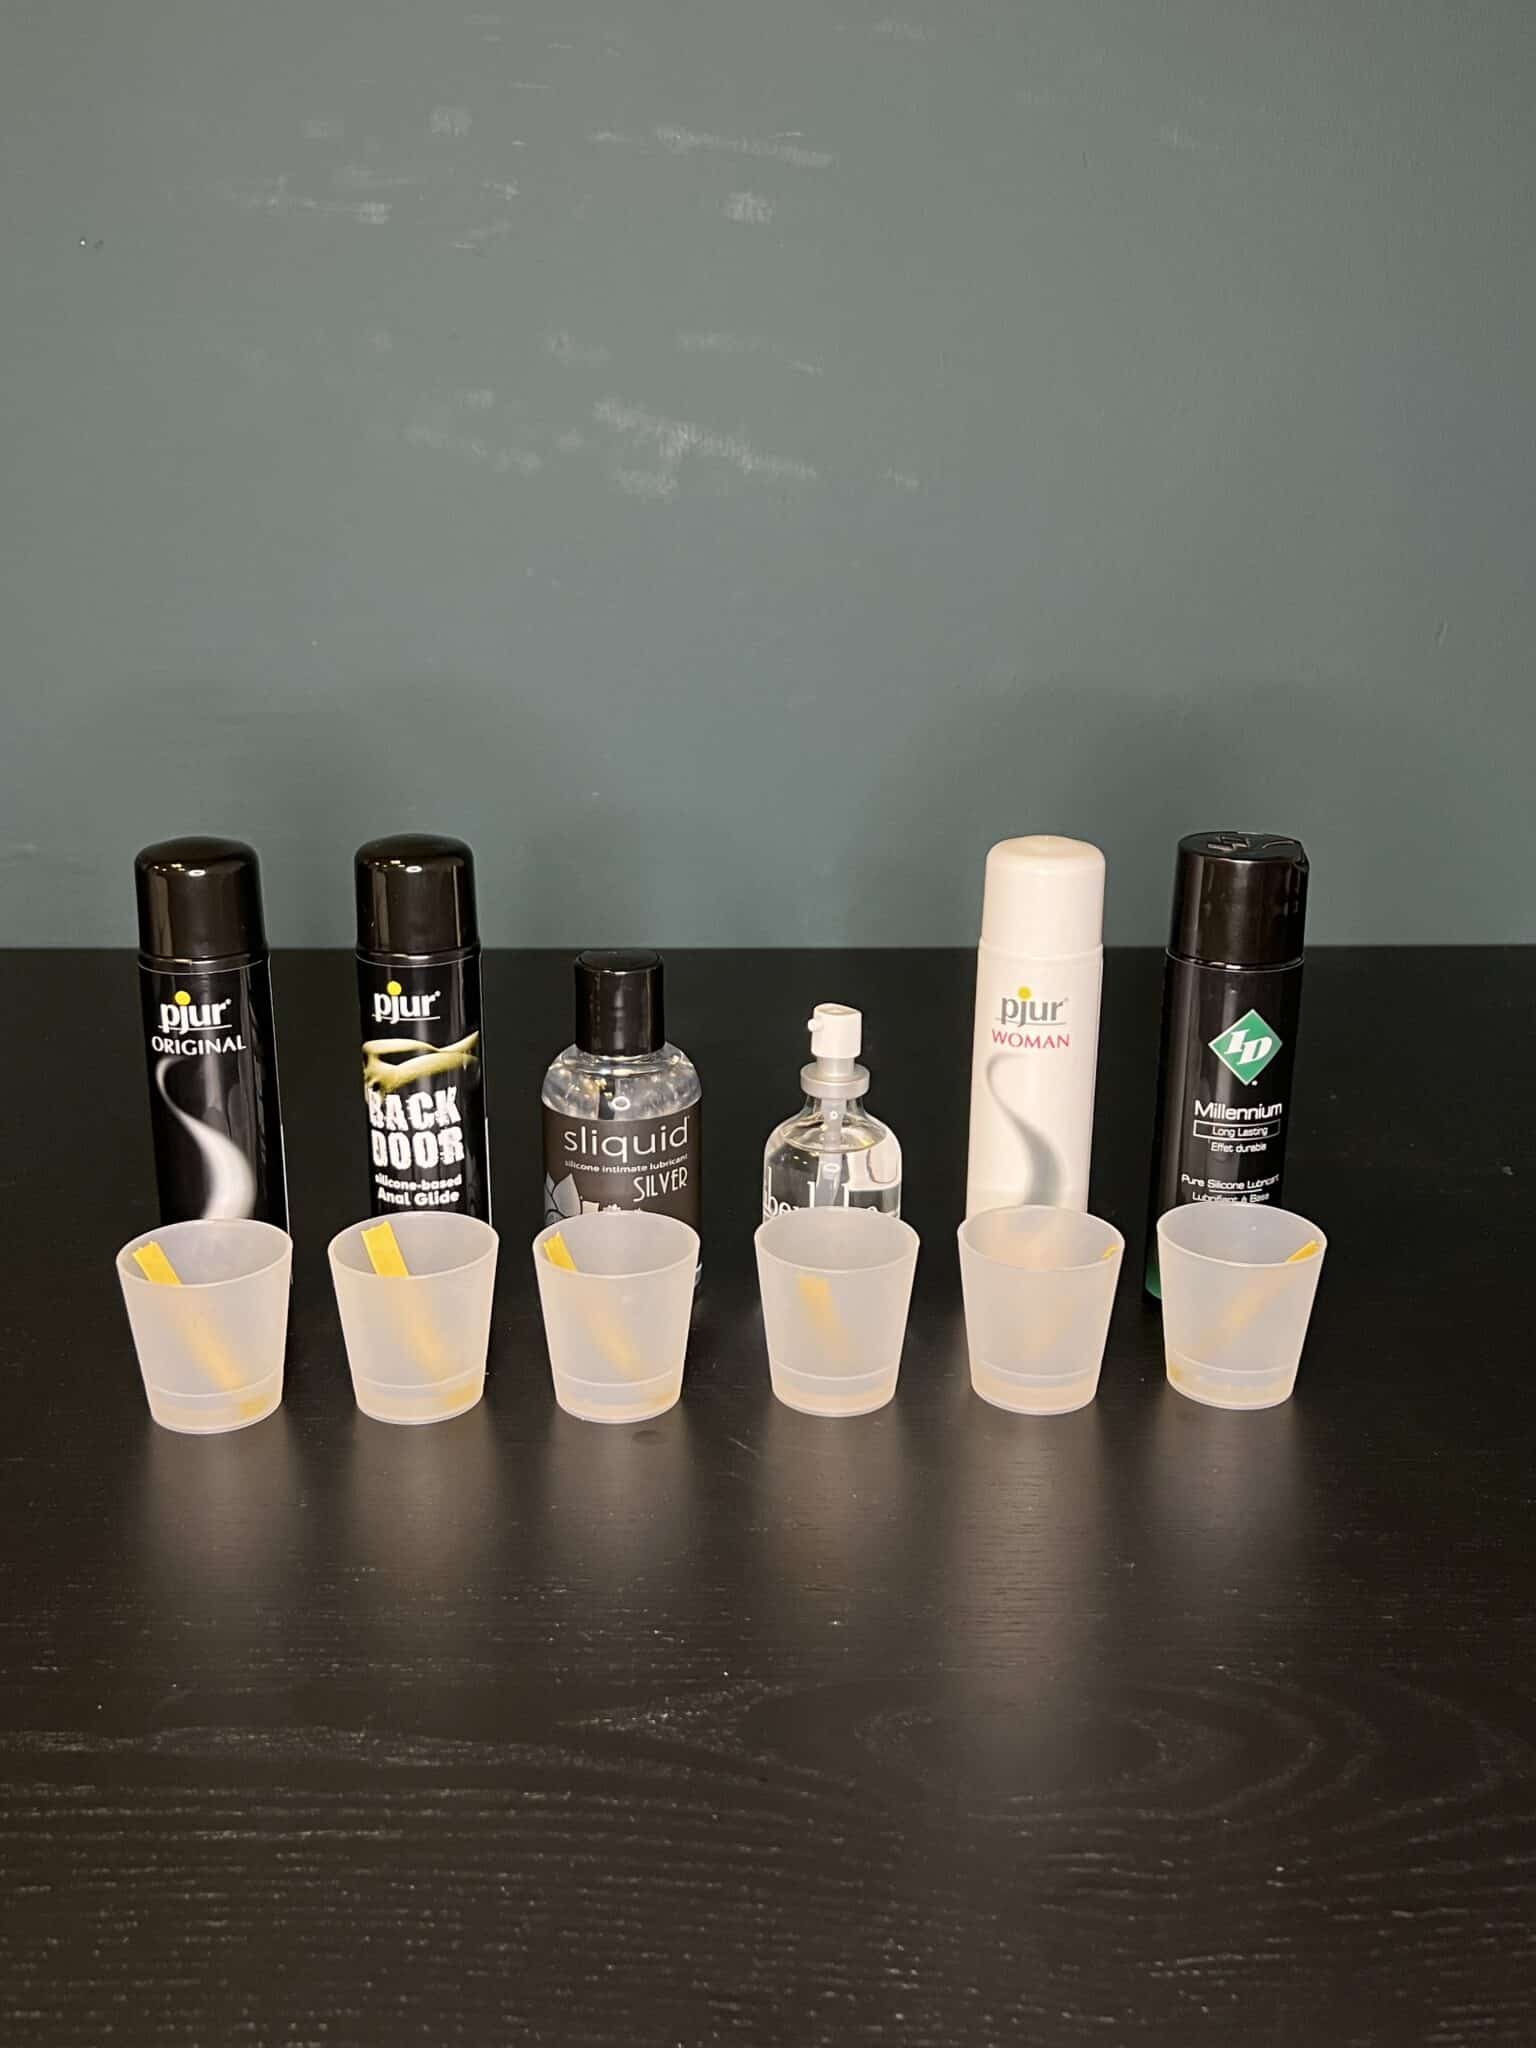 How were the Organic lubes tested?